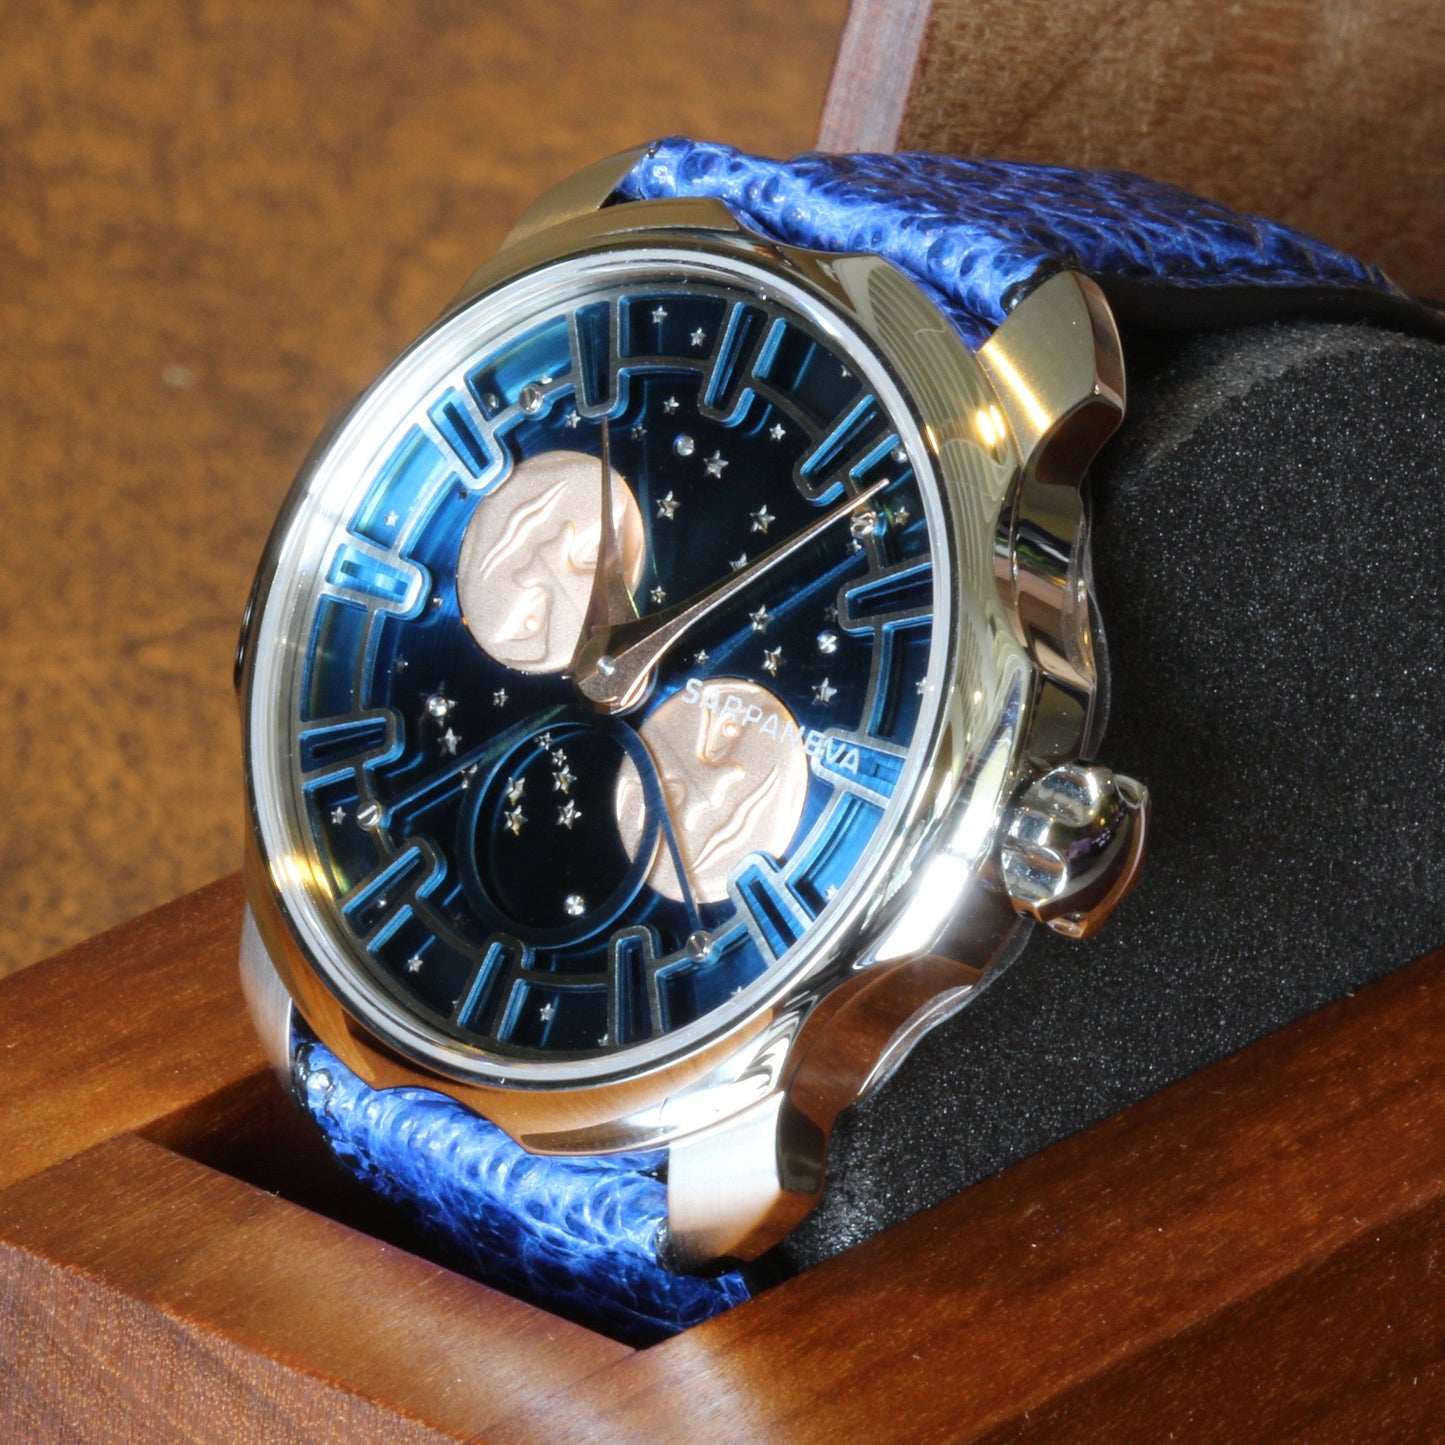 Estate one of only ten pieces, the Sarpaneva Northern Lights watch